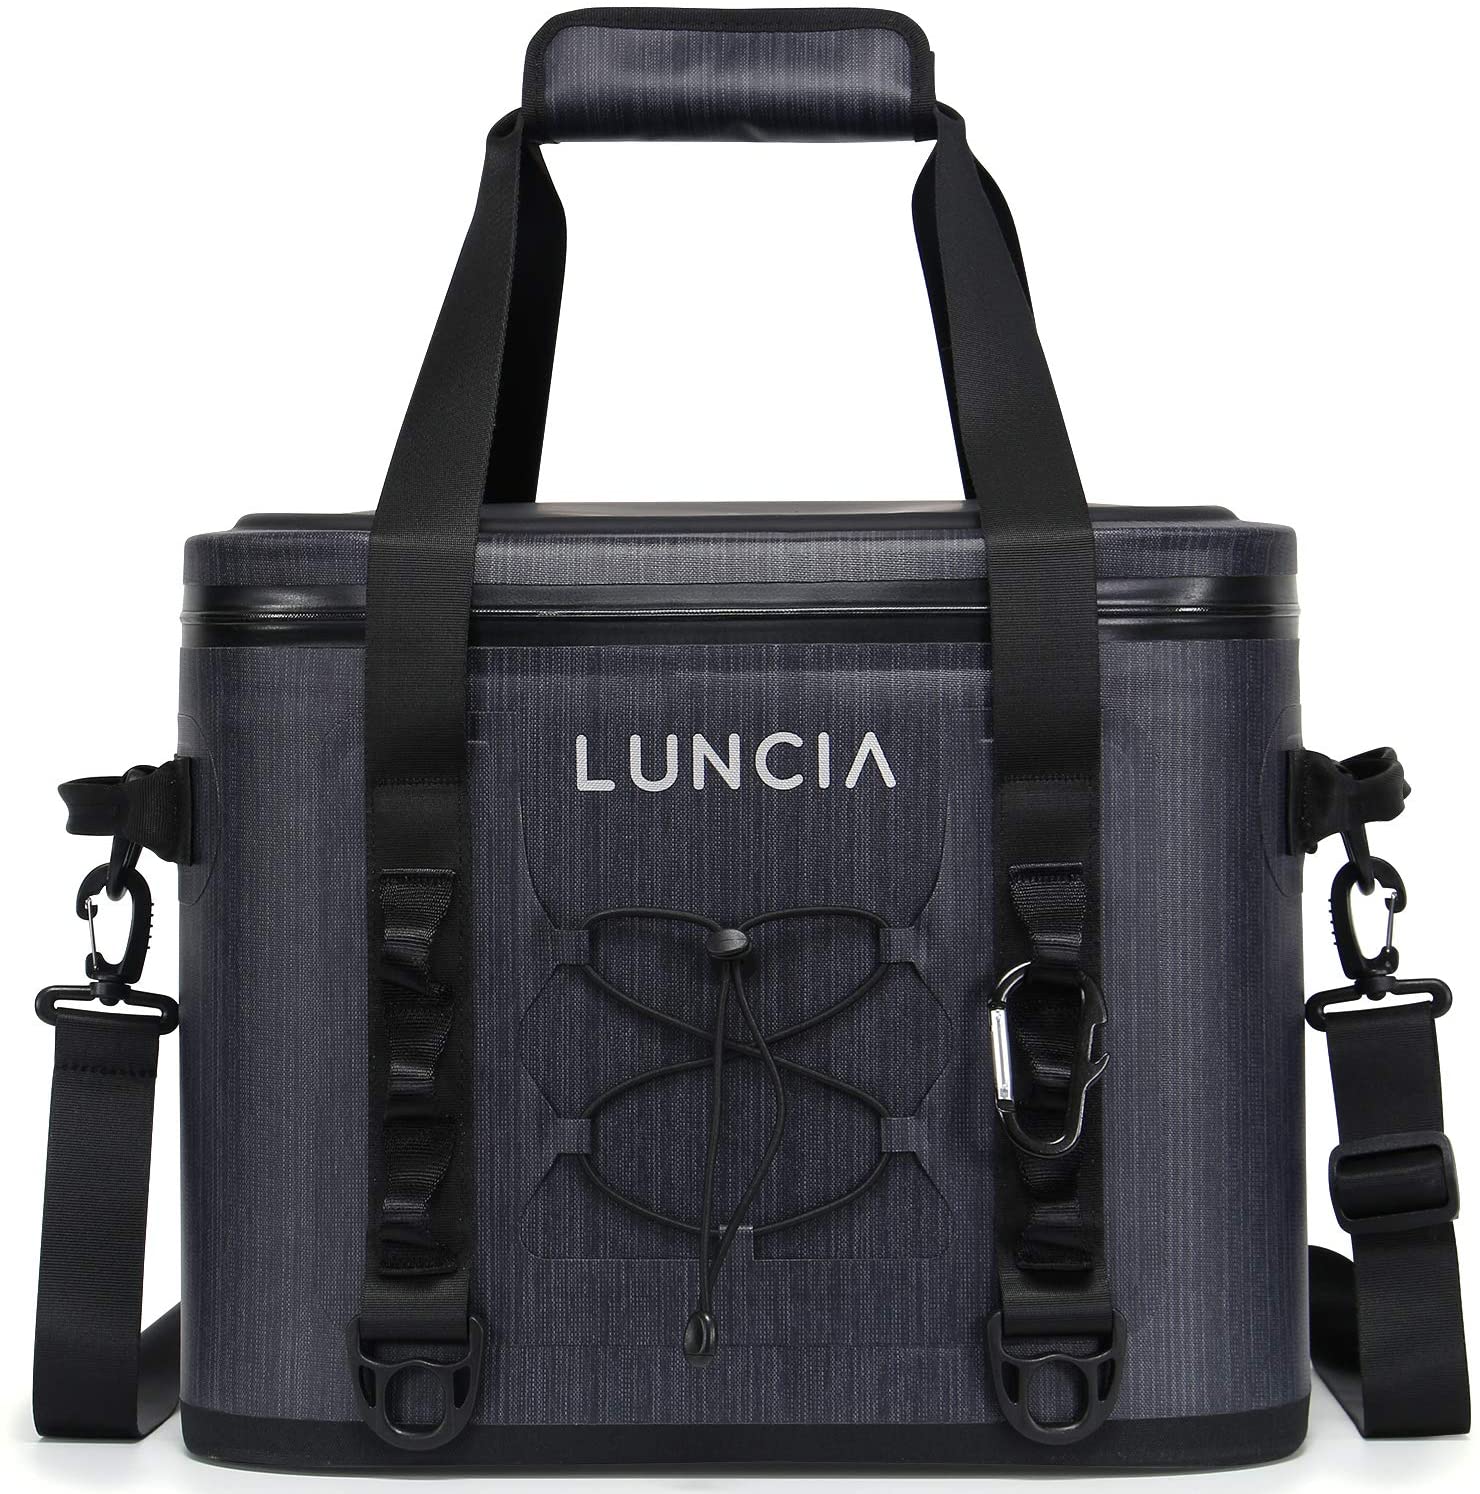 LUNCIA Waterproof Insulated Soft Cooler